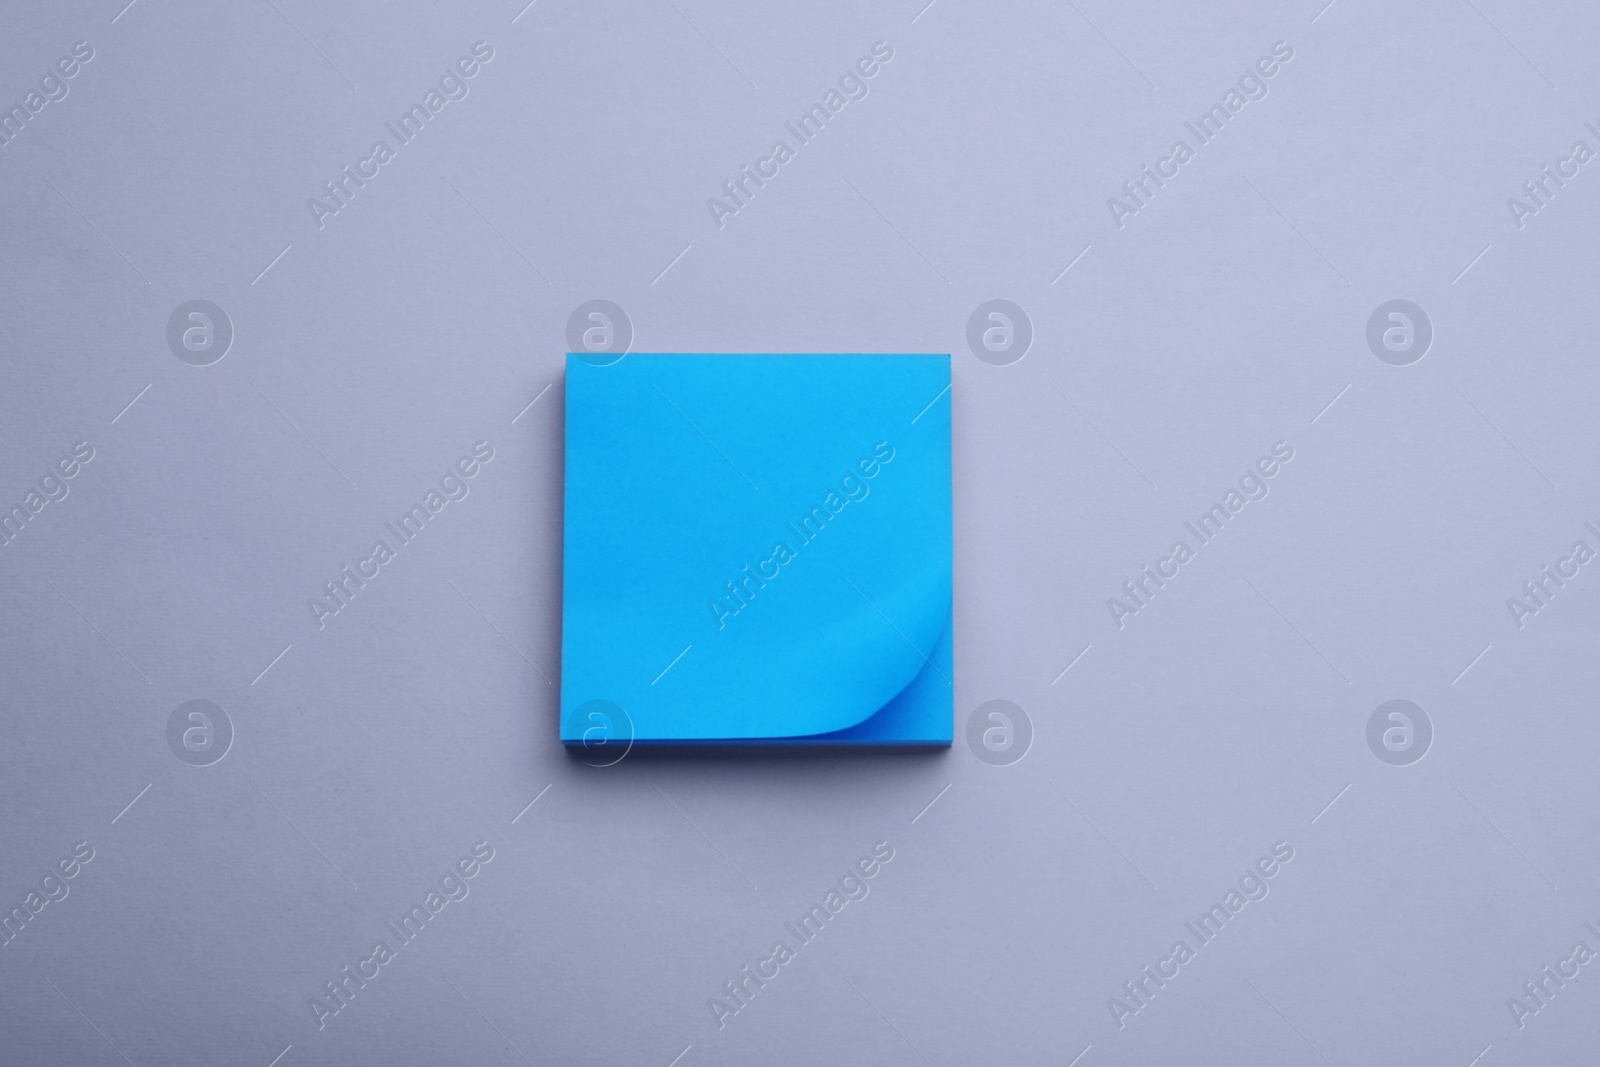 Photo of Paper note on light purple background, top view